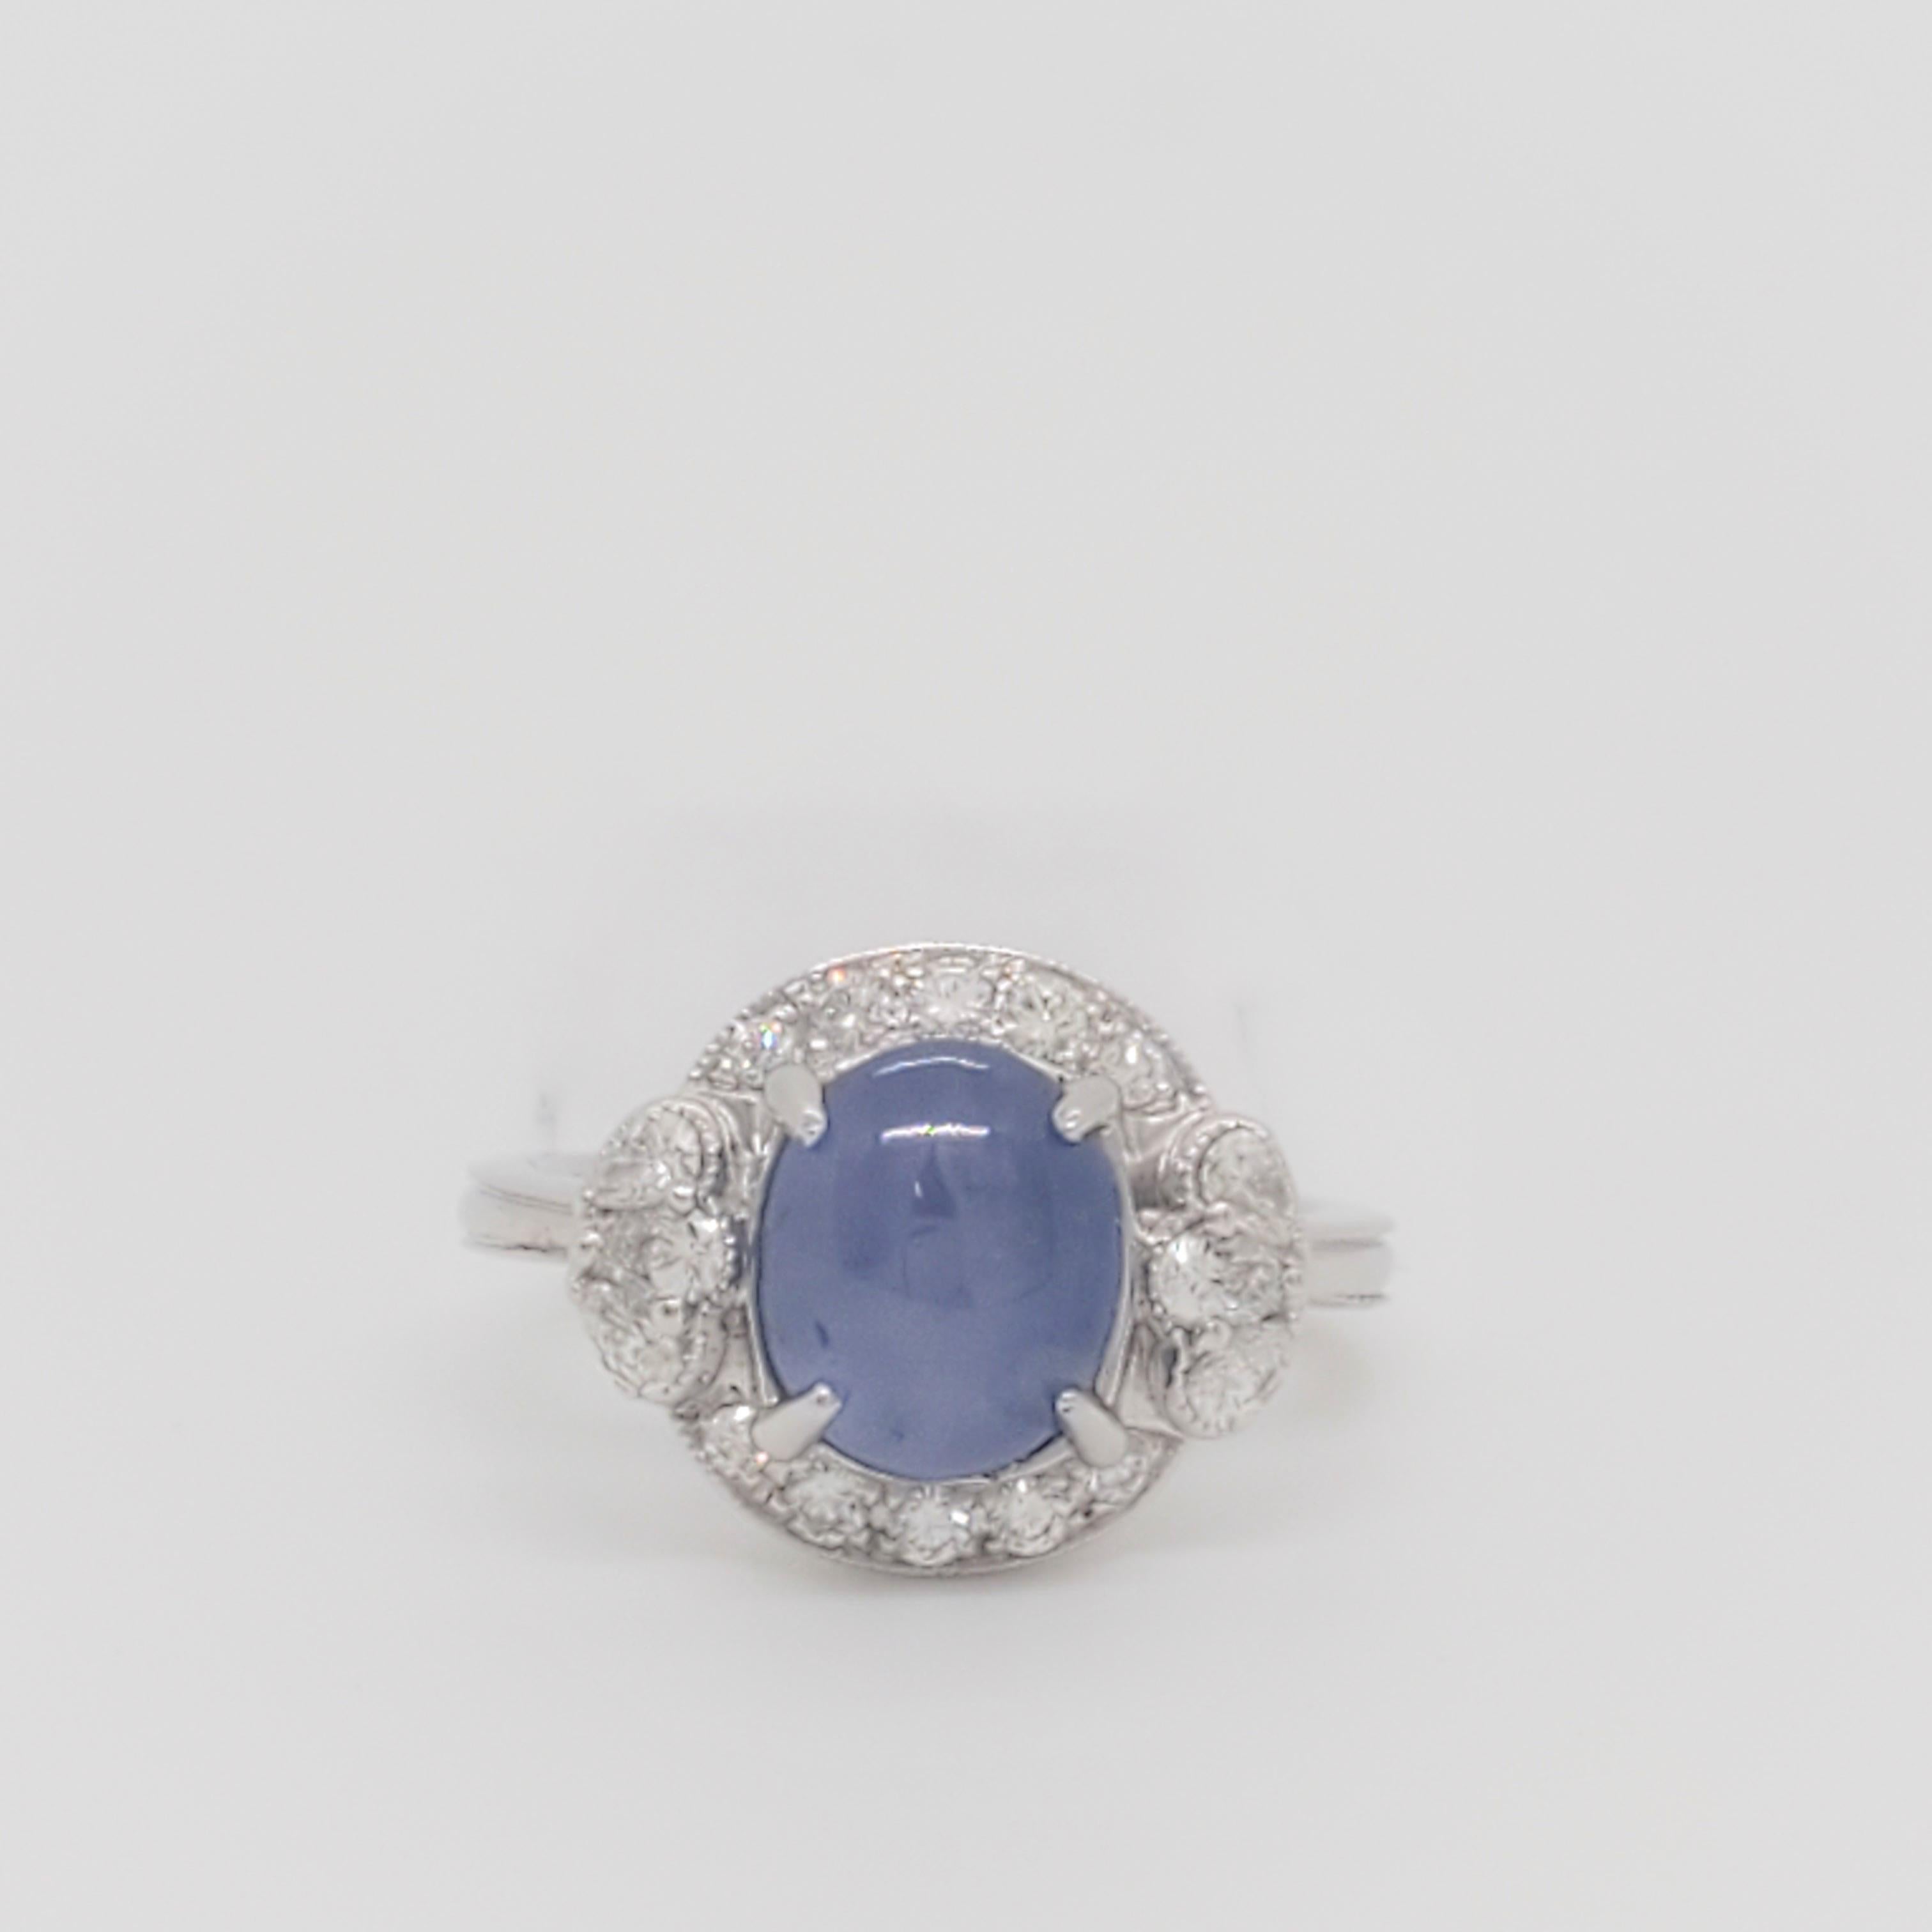 Gorgeous 4.93 ct. blue star sapphire oval cabochon with 0.49 ct. good quality white diamond pear shapes and rounds.  Handmade 18k white gold mounting. Ring size 6.25.